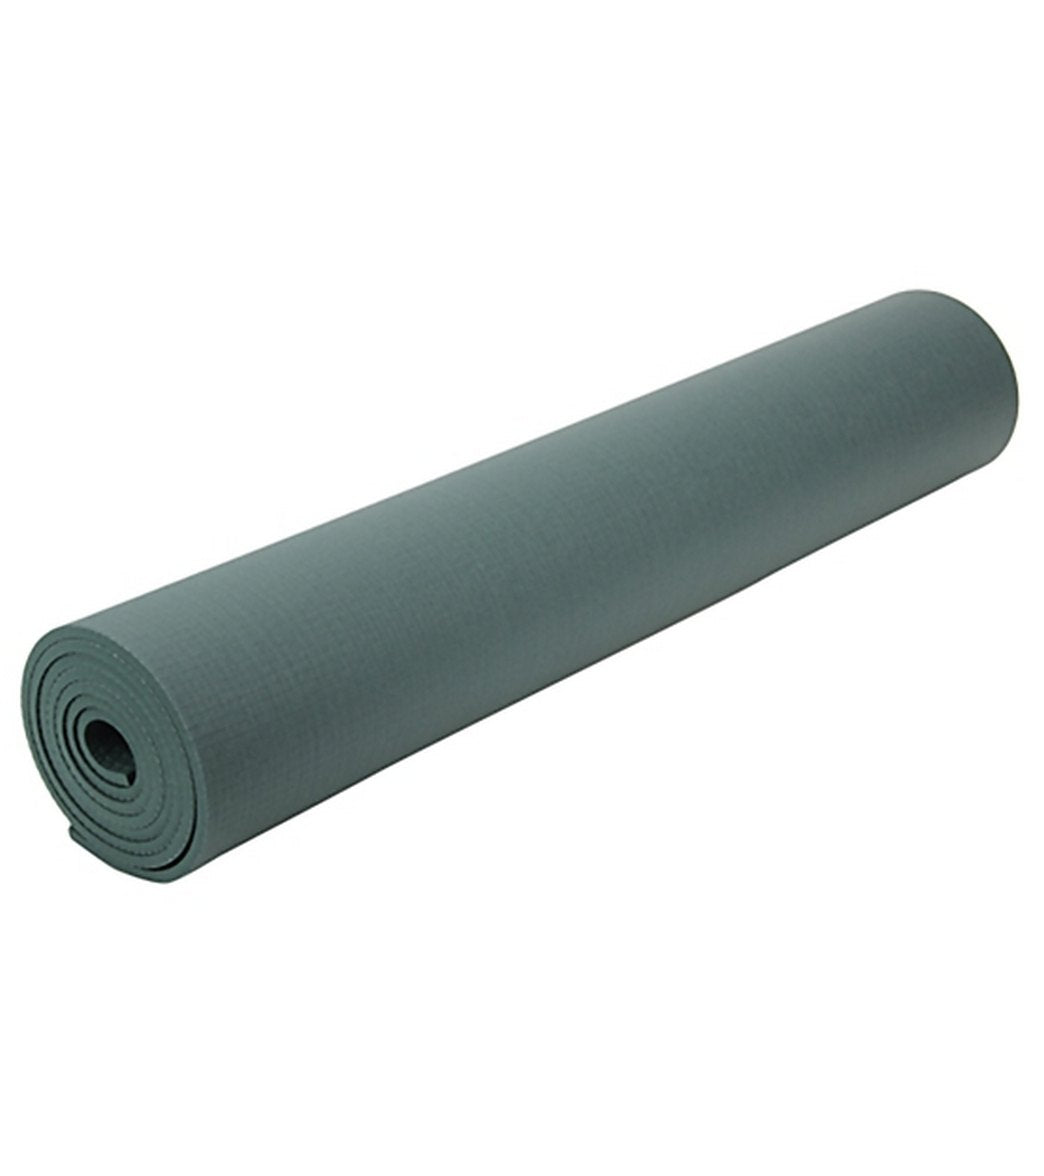 Strongtek Extra Thick Yoga Mat, 8mm, Eco Friendly TPE Yoga Mat for